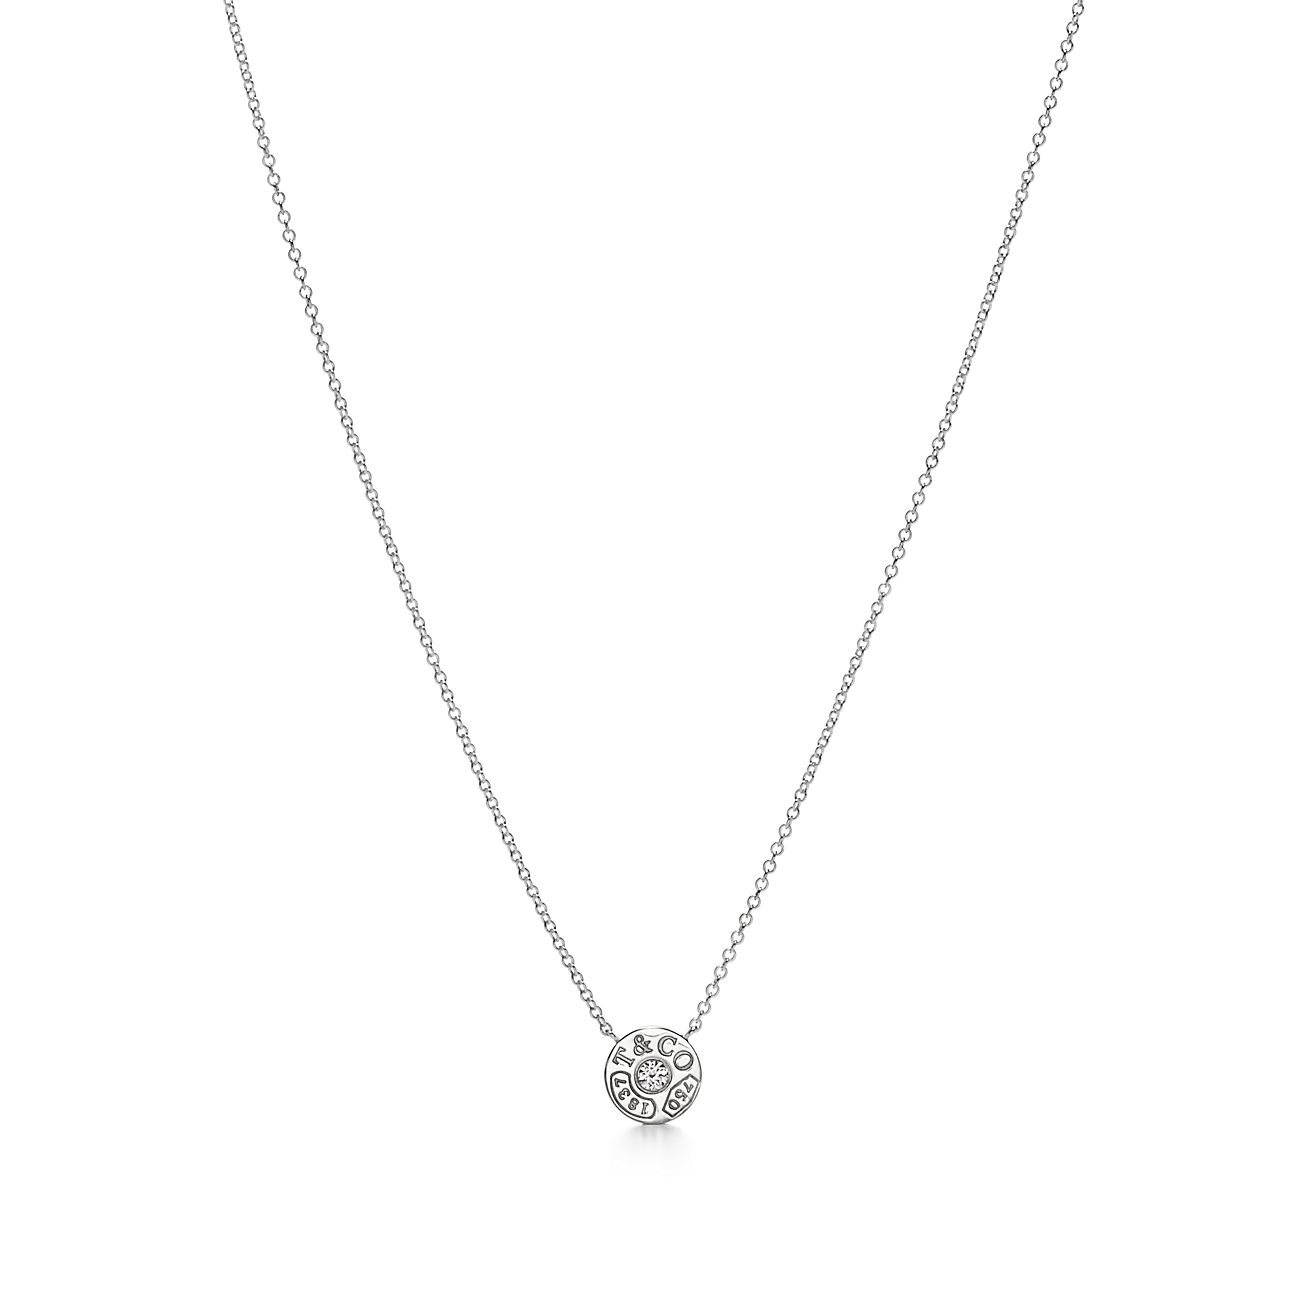 Tiffany Lock Pendant in White Gold with Diamonds, Large